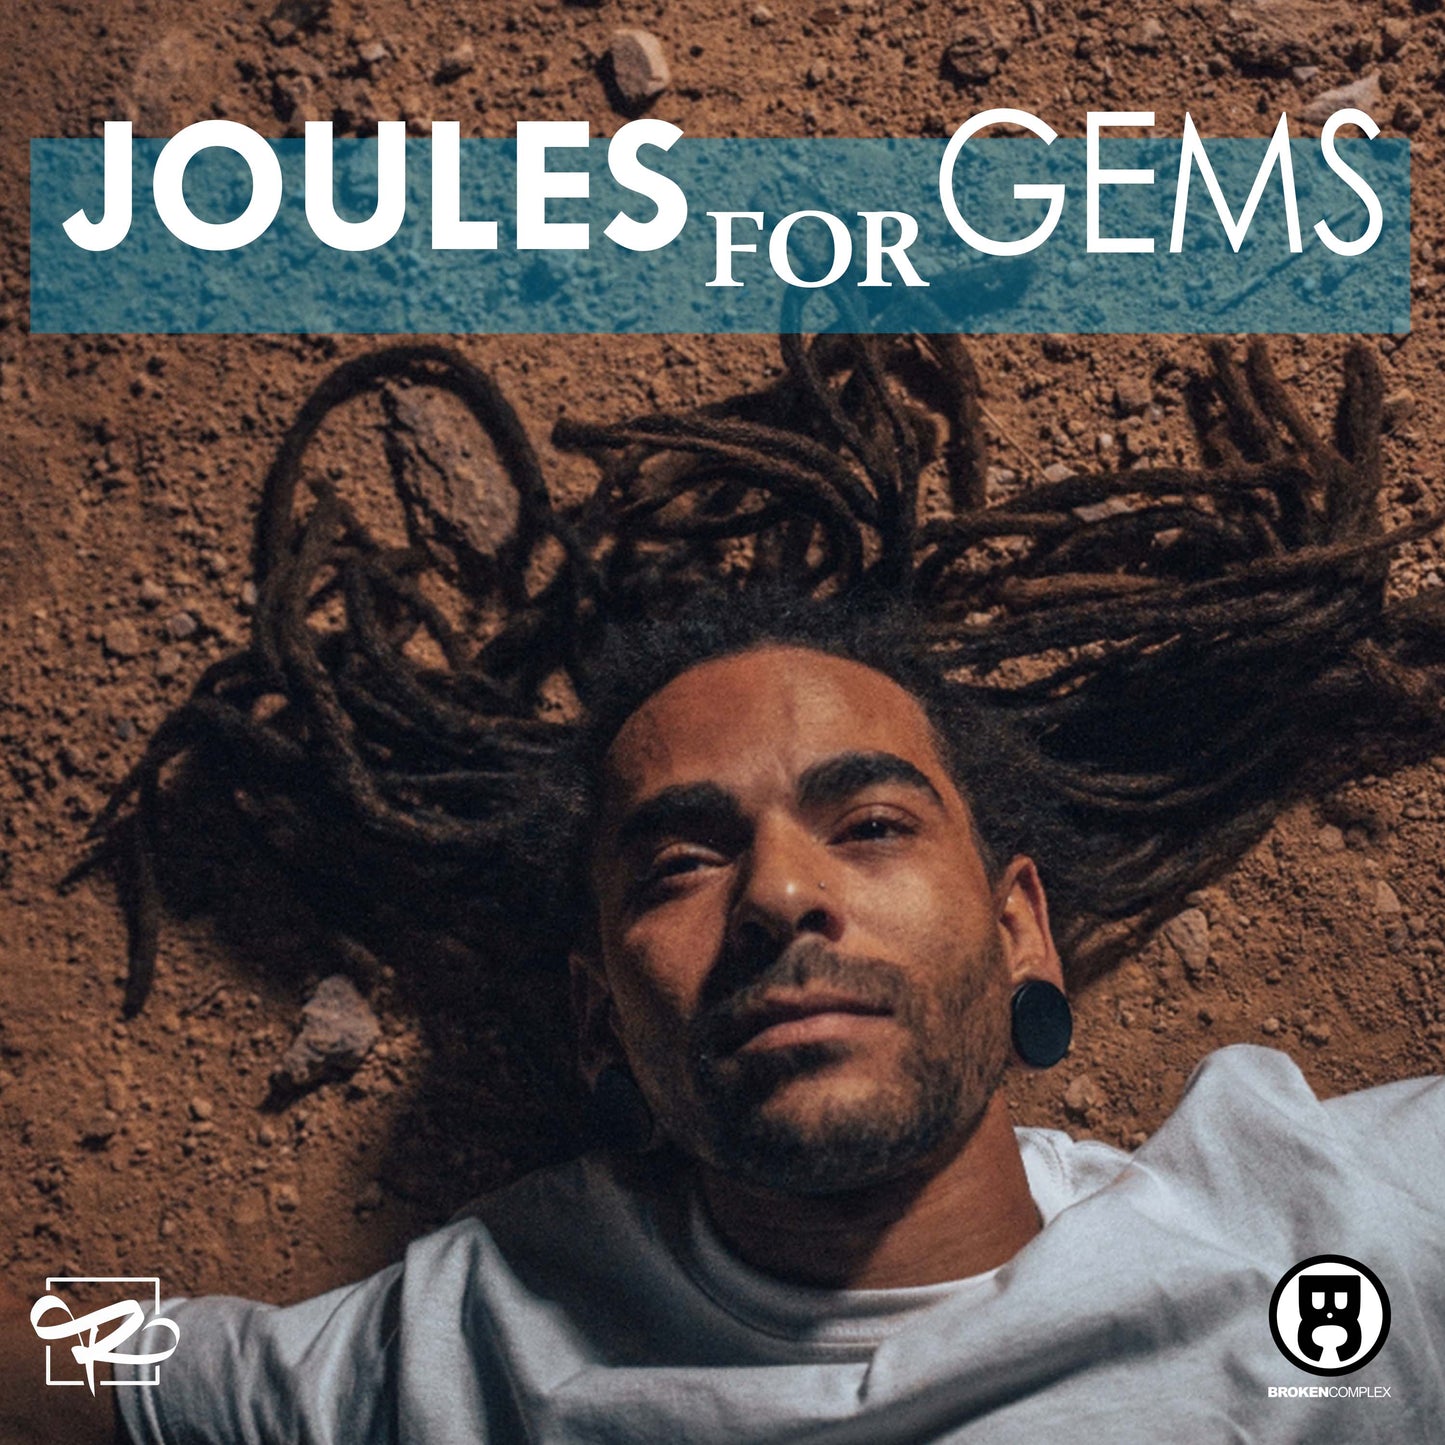 Joules For Gems (EP)